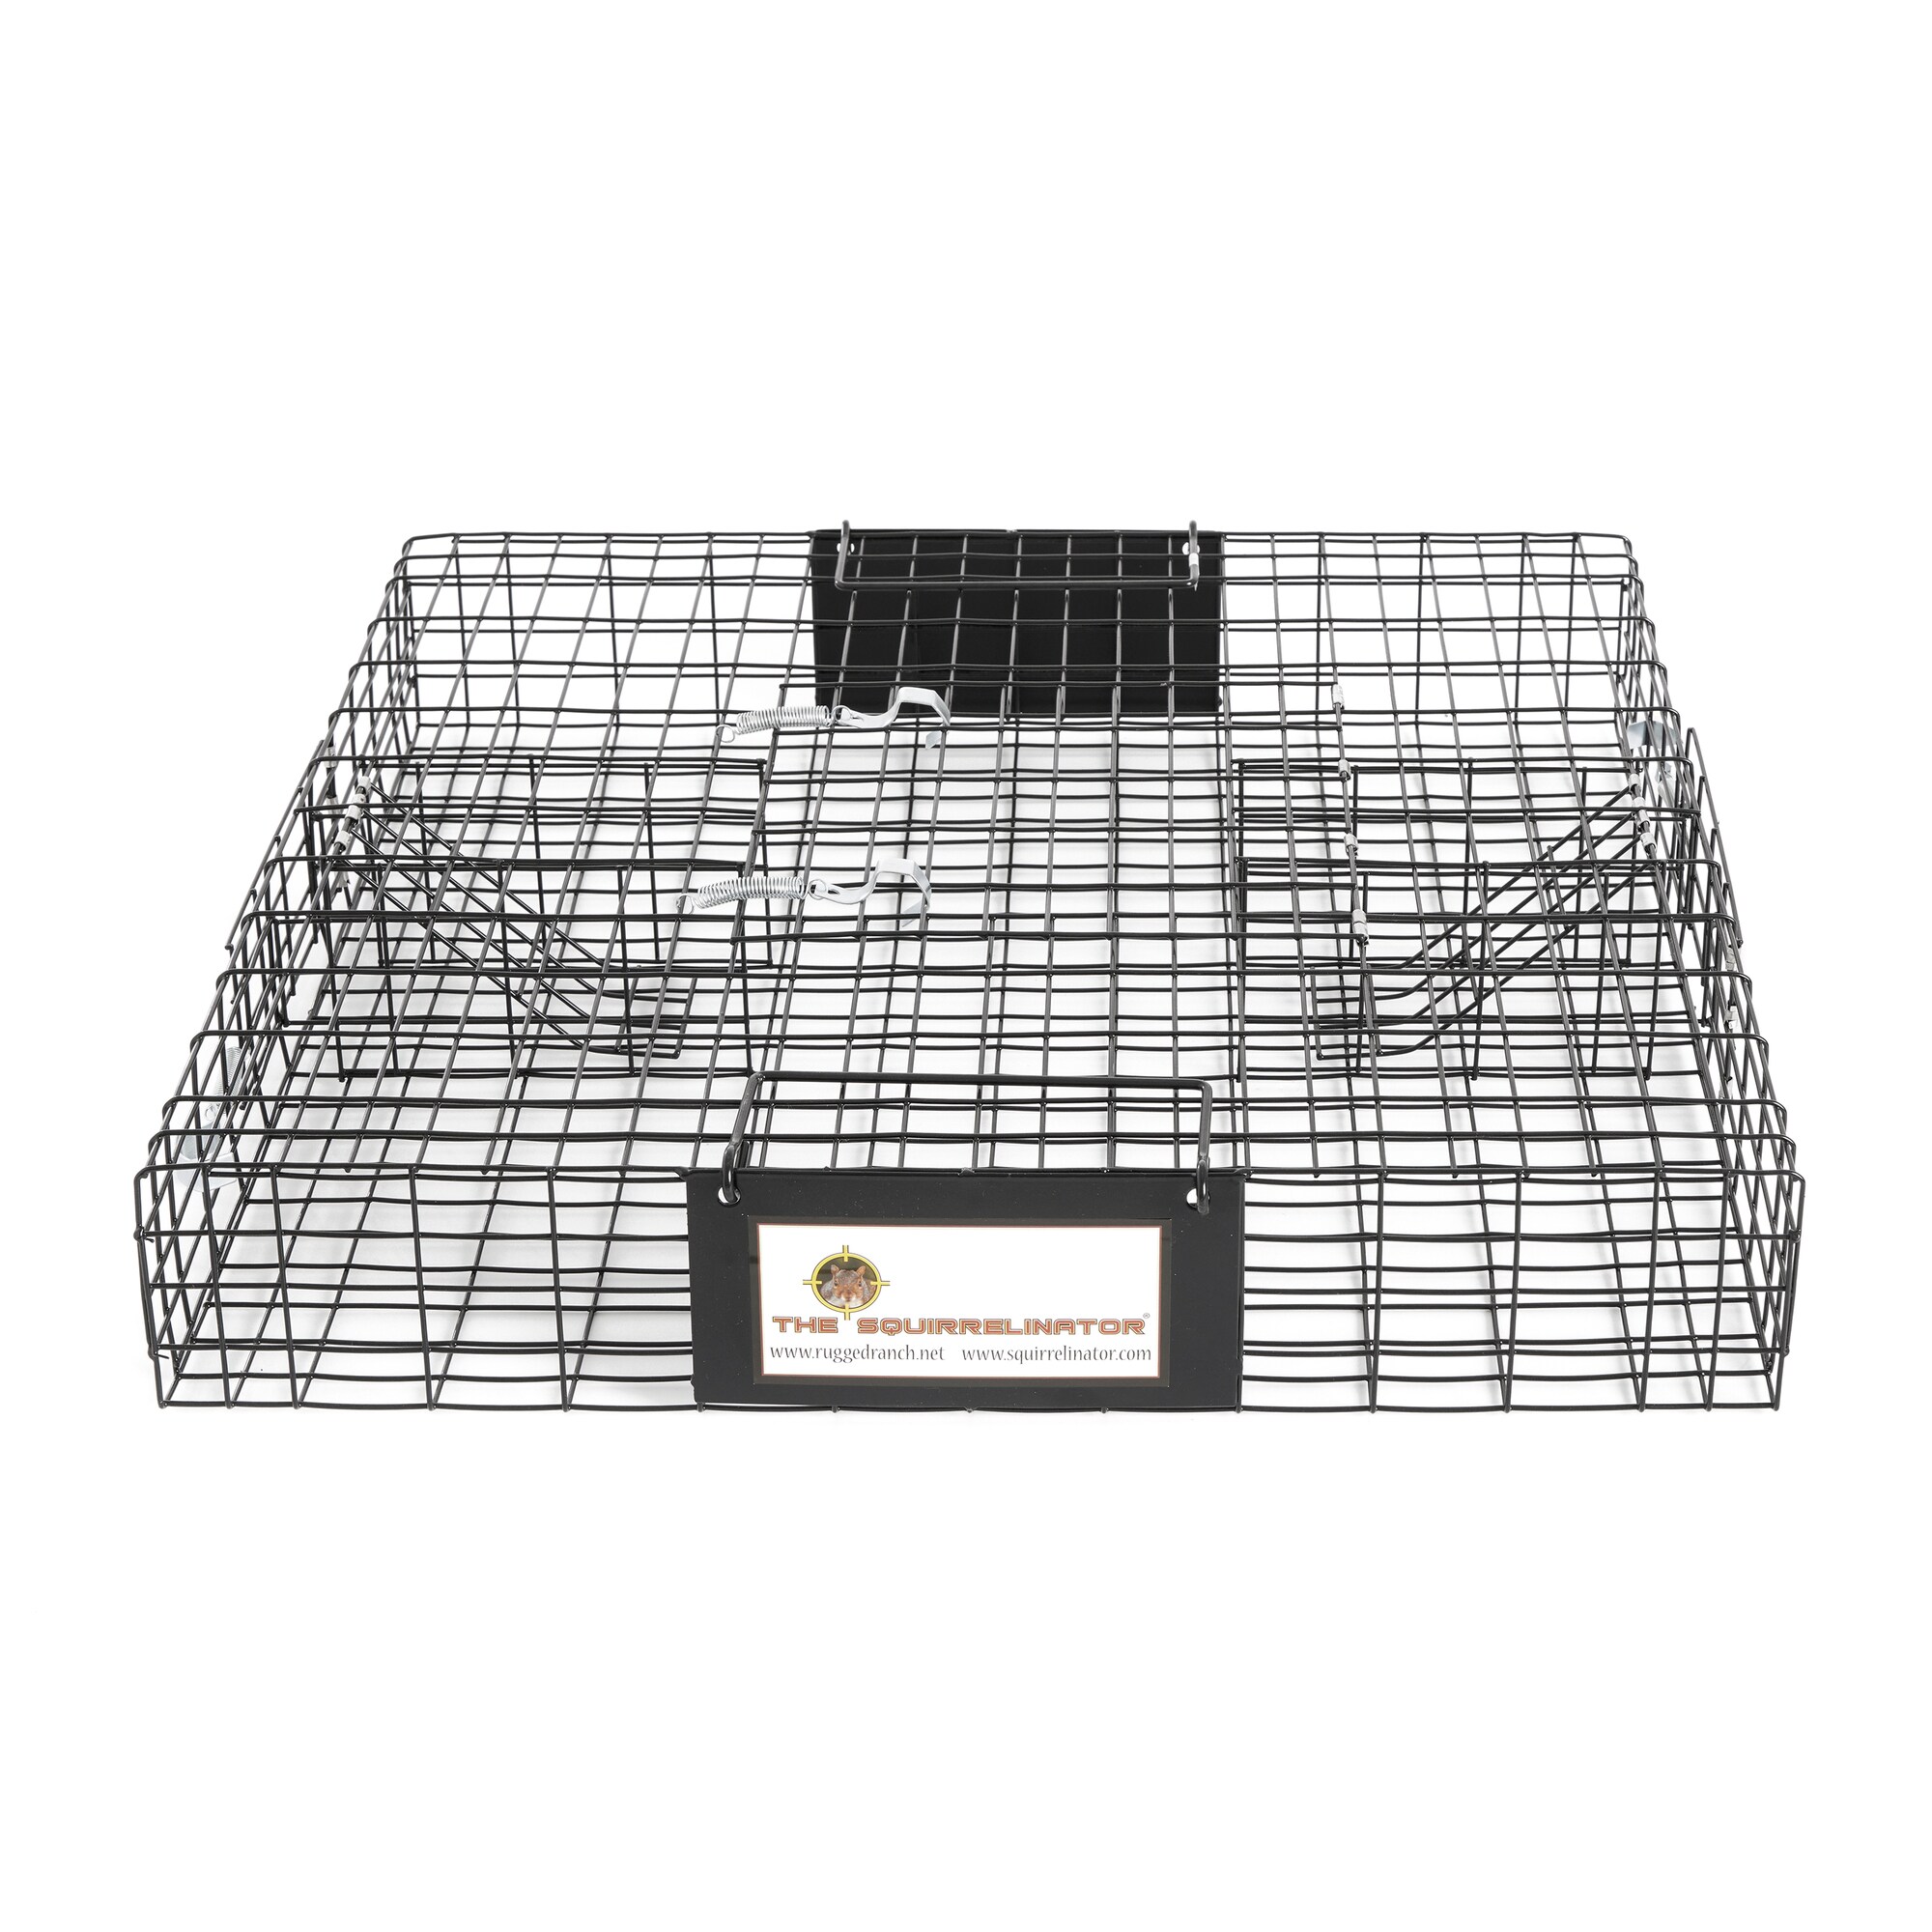 Rugged Ranch SQR Squirrelinator Live Squirrel Chipmunk Metal 2 Door Trap  Cage - Outdoor Animal & Rodent Control - Safer for Pets & Kids - 1 Count in  the Animal & Rodent